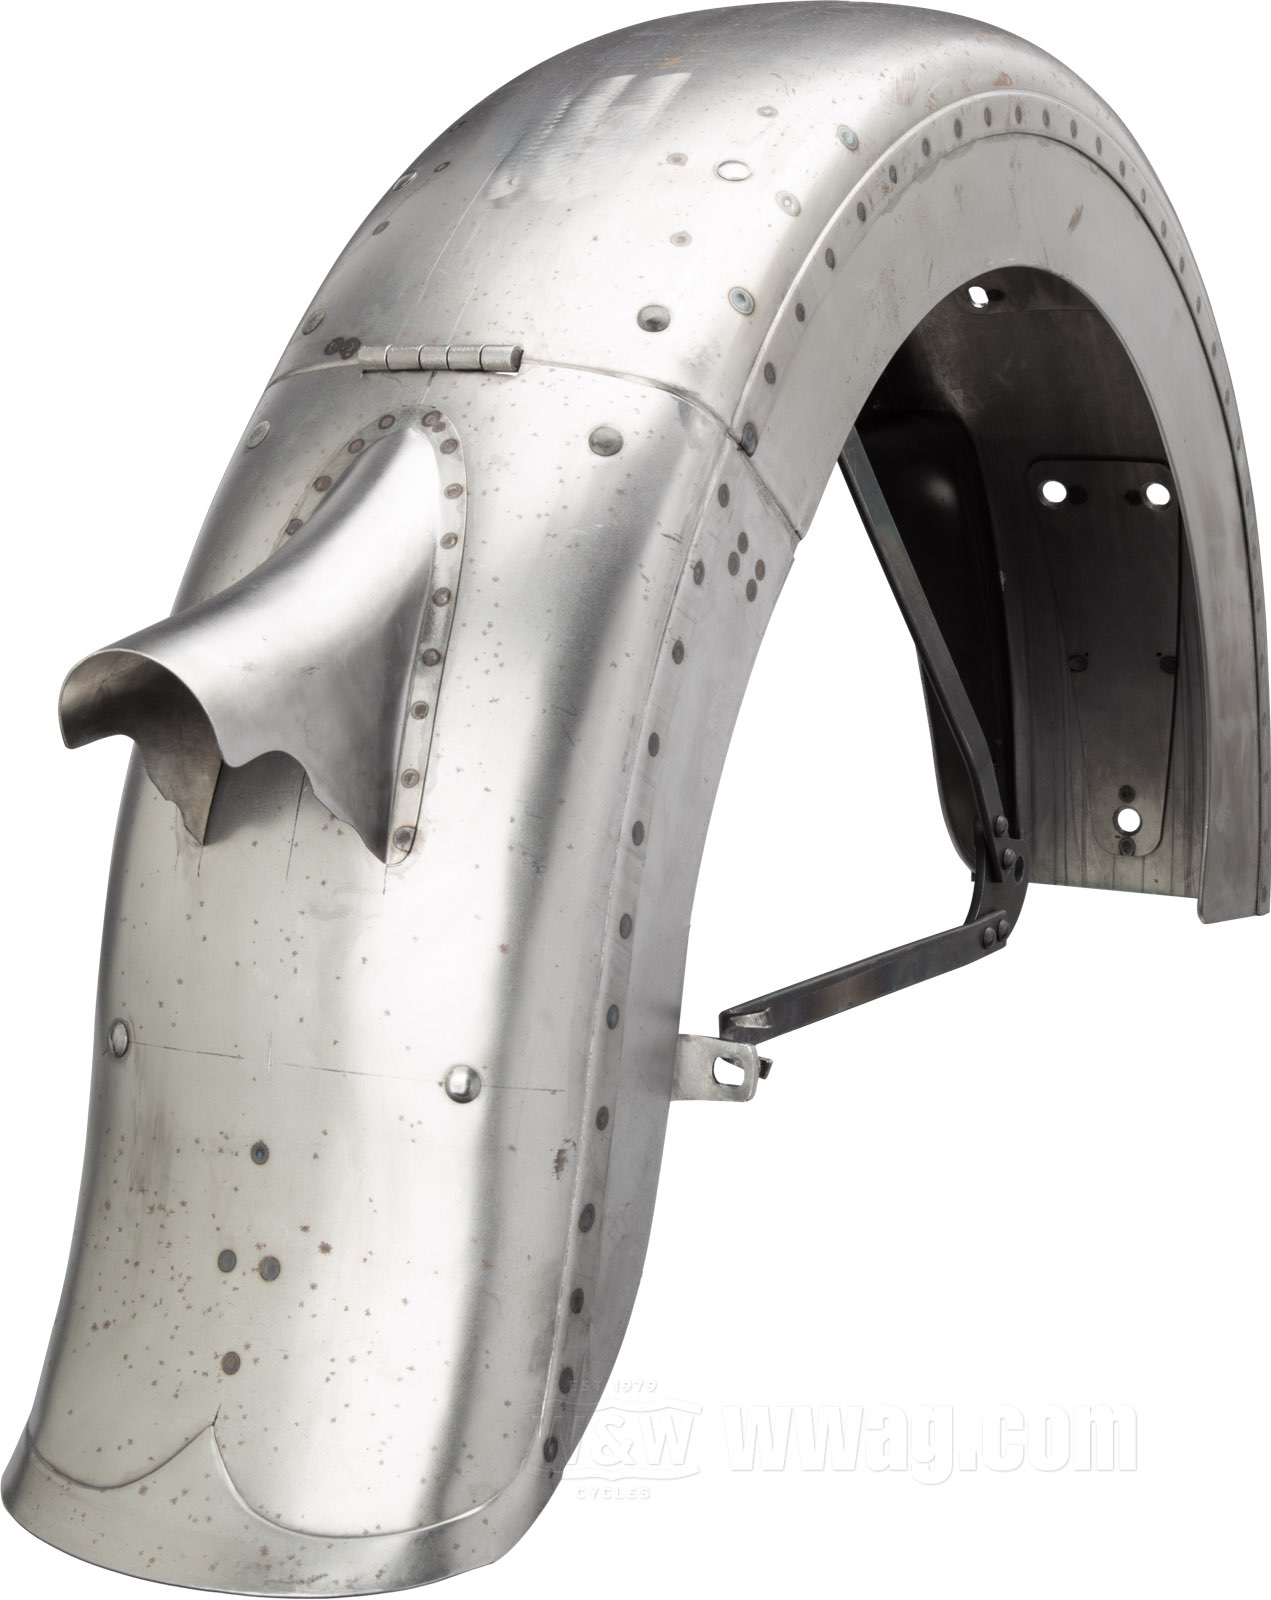 W W Cycles Rear Fenders Oem Replacement The Cyclery Rear Fenders For Big Twins 1936 1948